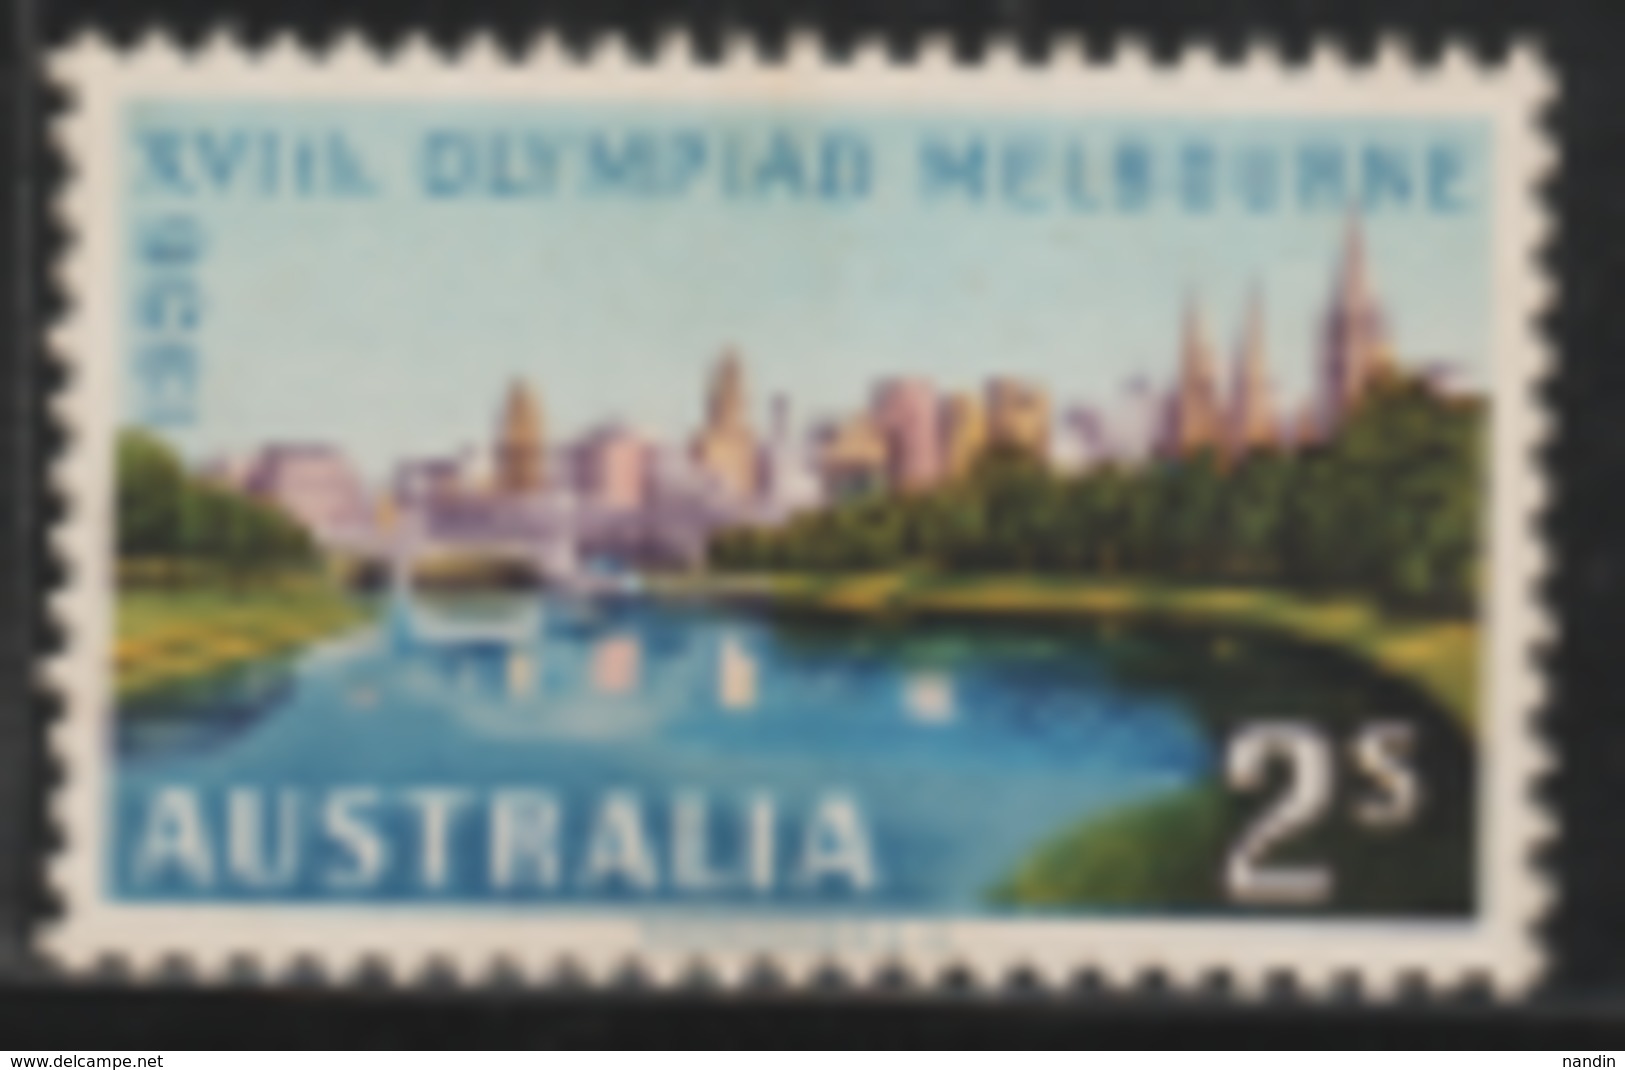 1956 MELBOURNE OLYMPIC USED STAMP FROM AUSTRALIA - Sommer 1956: Melbourne